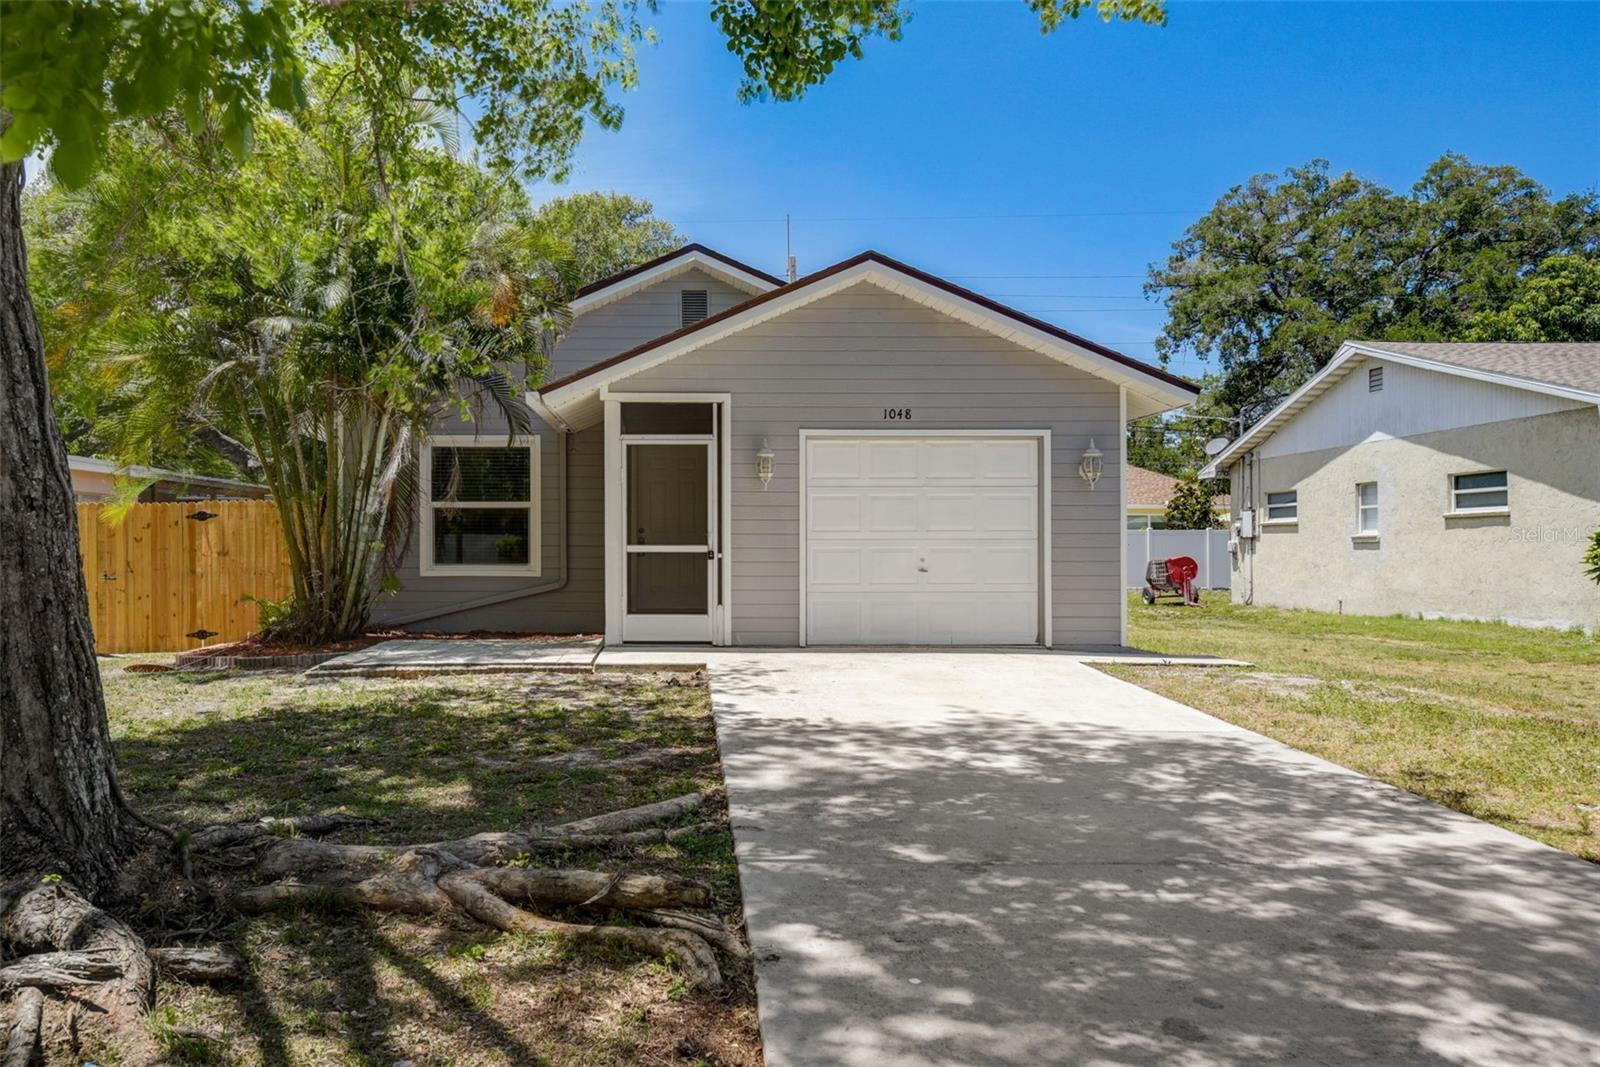 Photo one of 1048 S Allendale Ave Sarasota FL 34237 | MLS T3508561